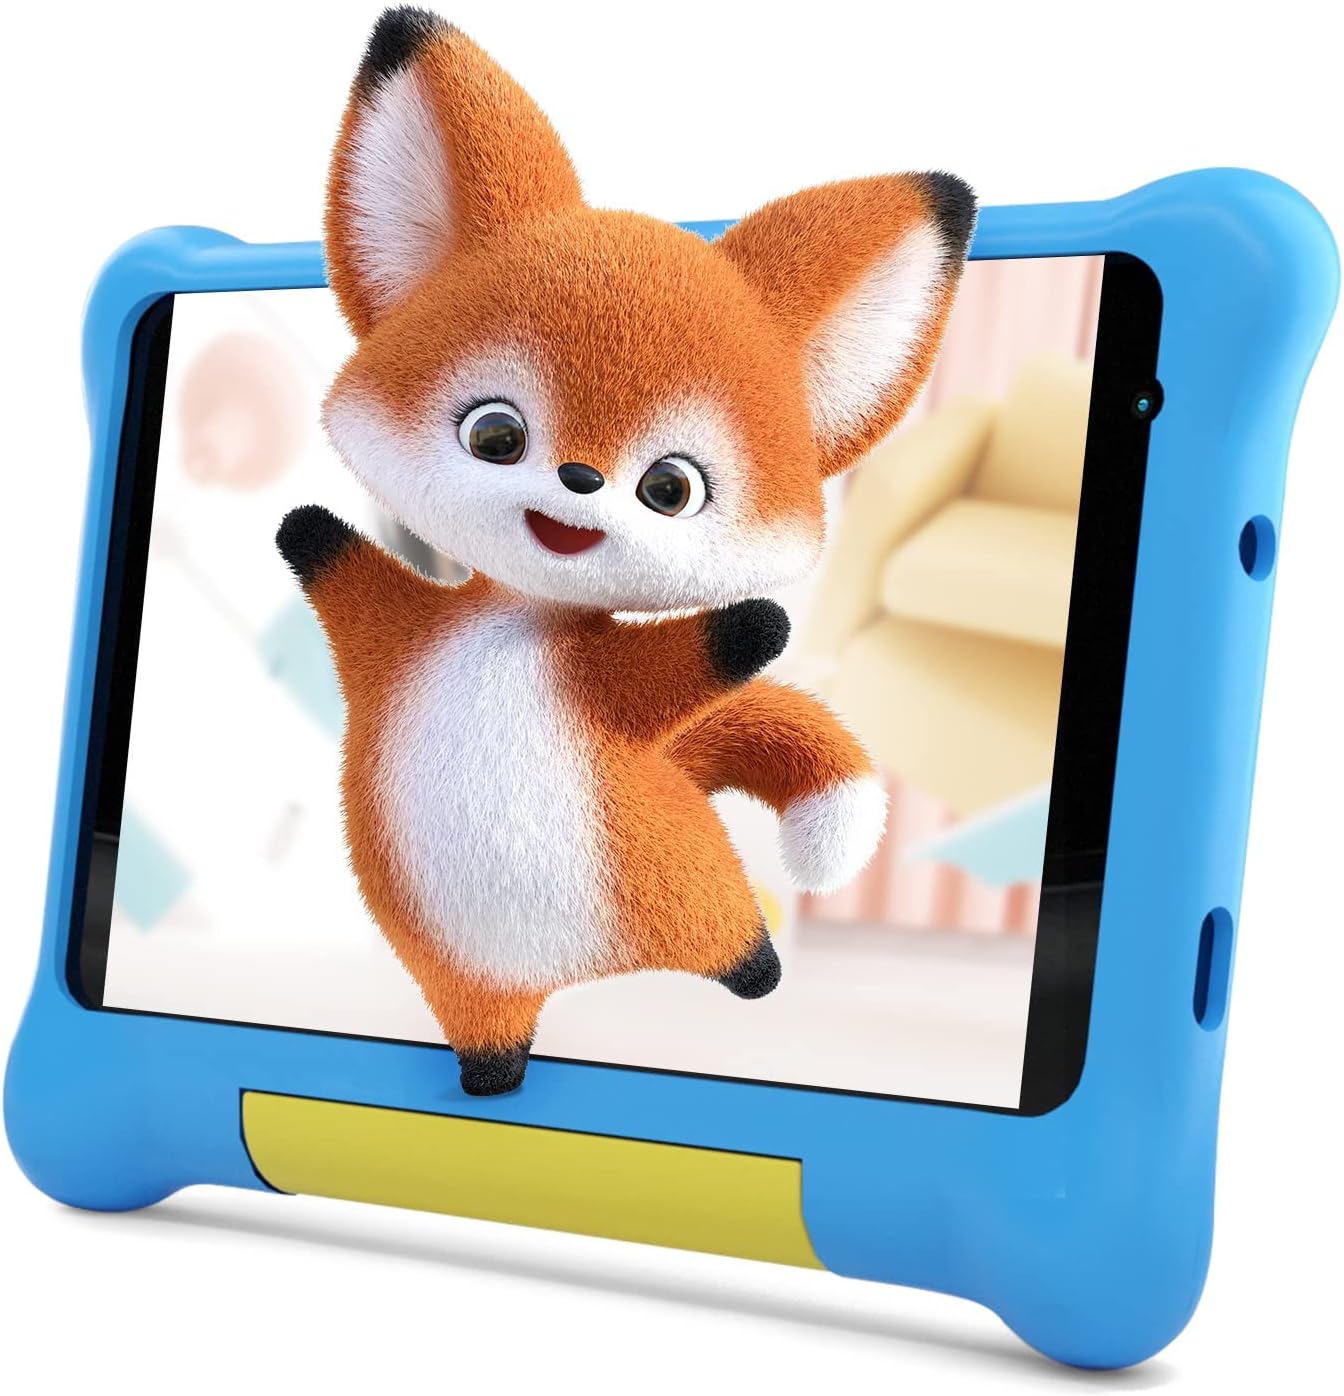 Funtablet Tablet for Kids Android 10 2GB RAM 32GB